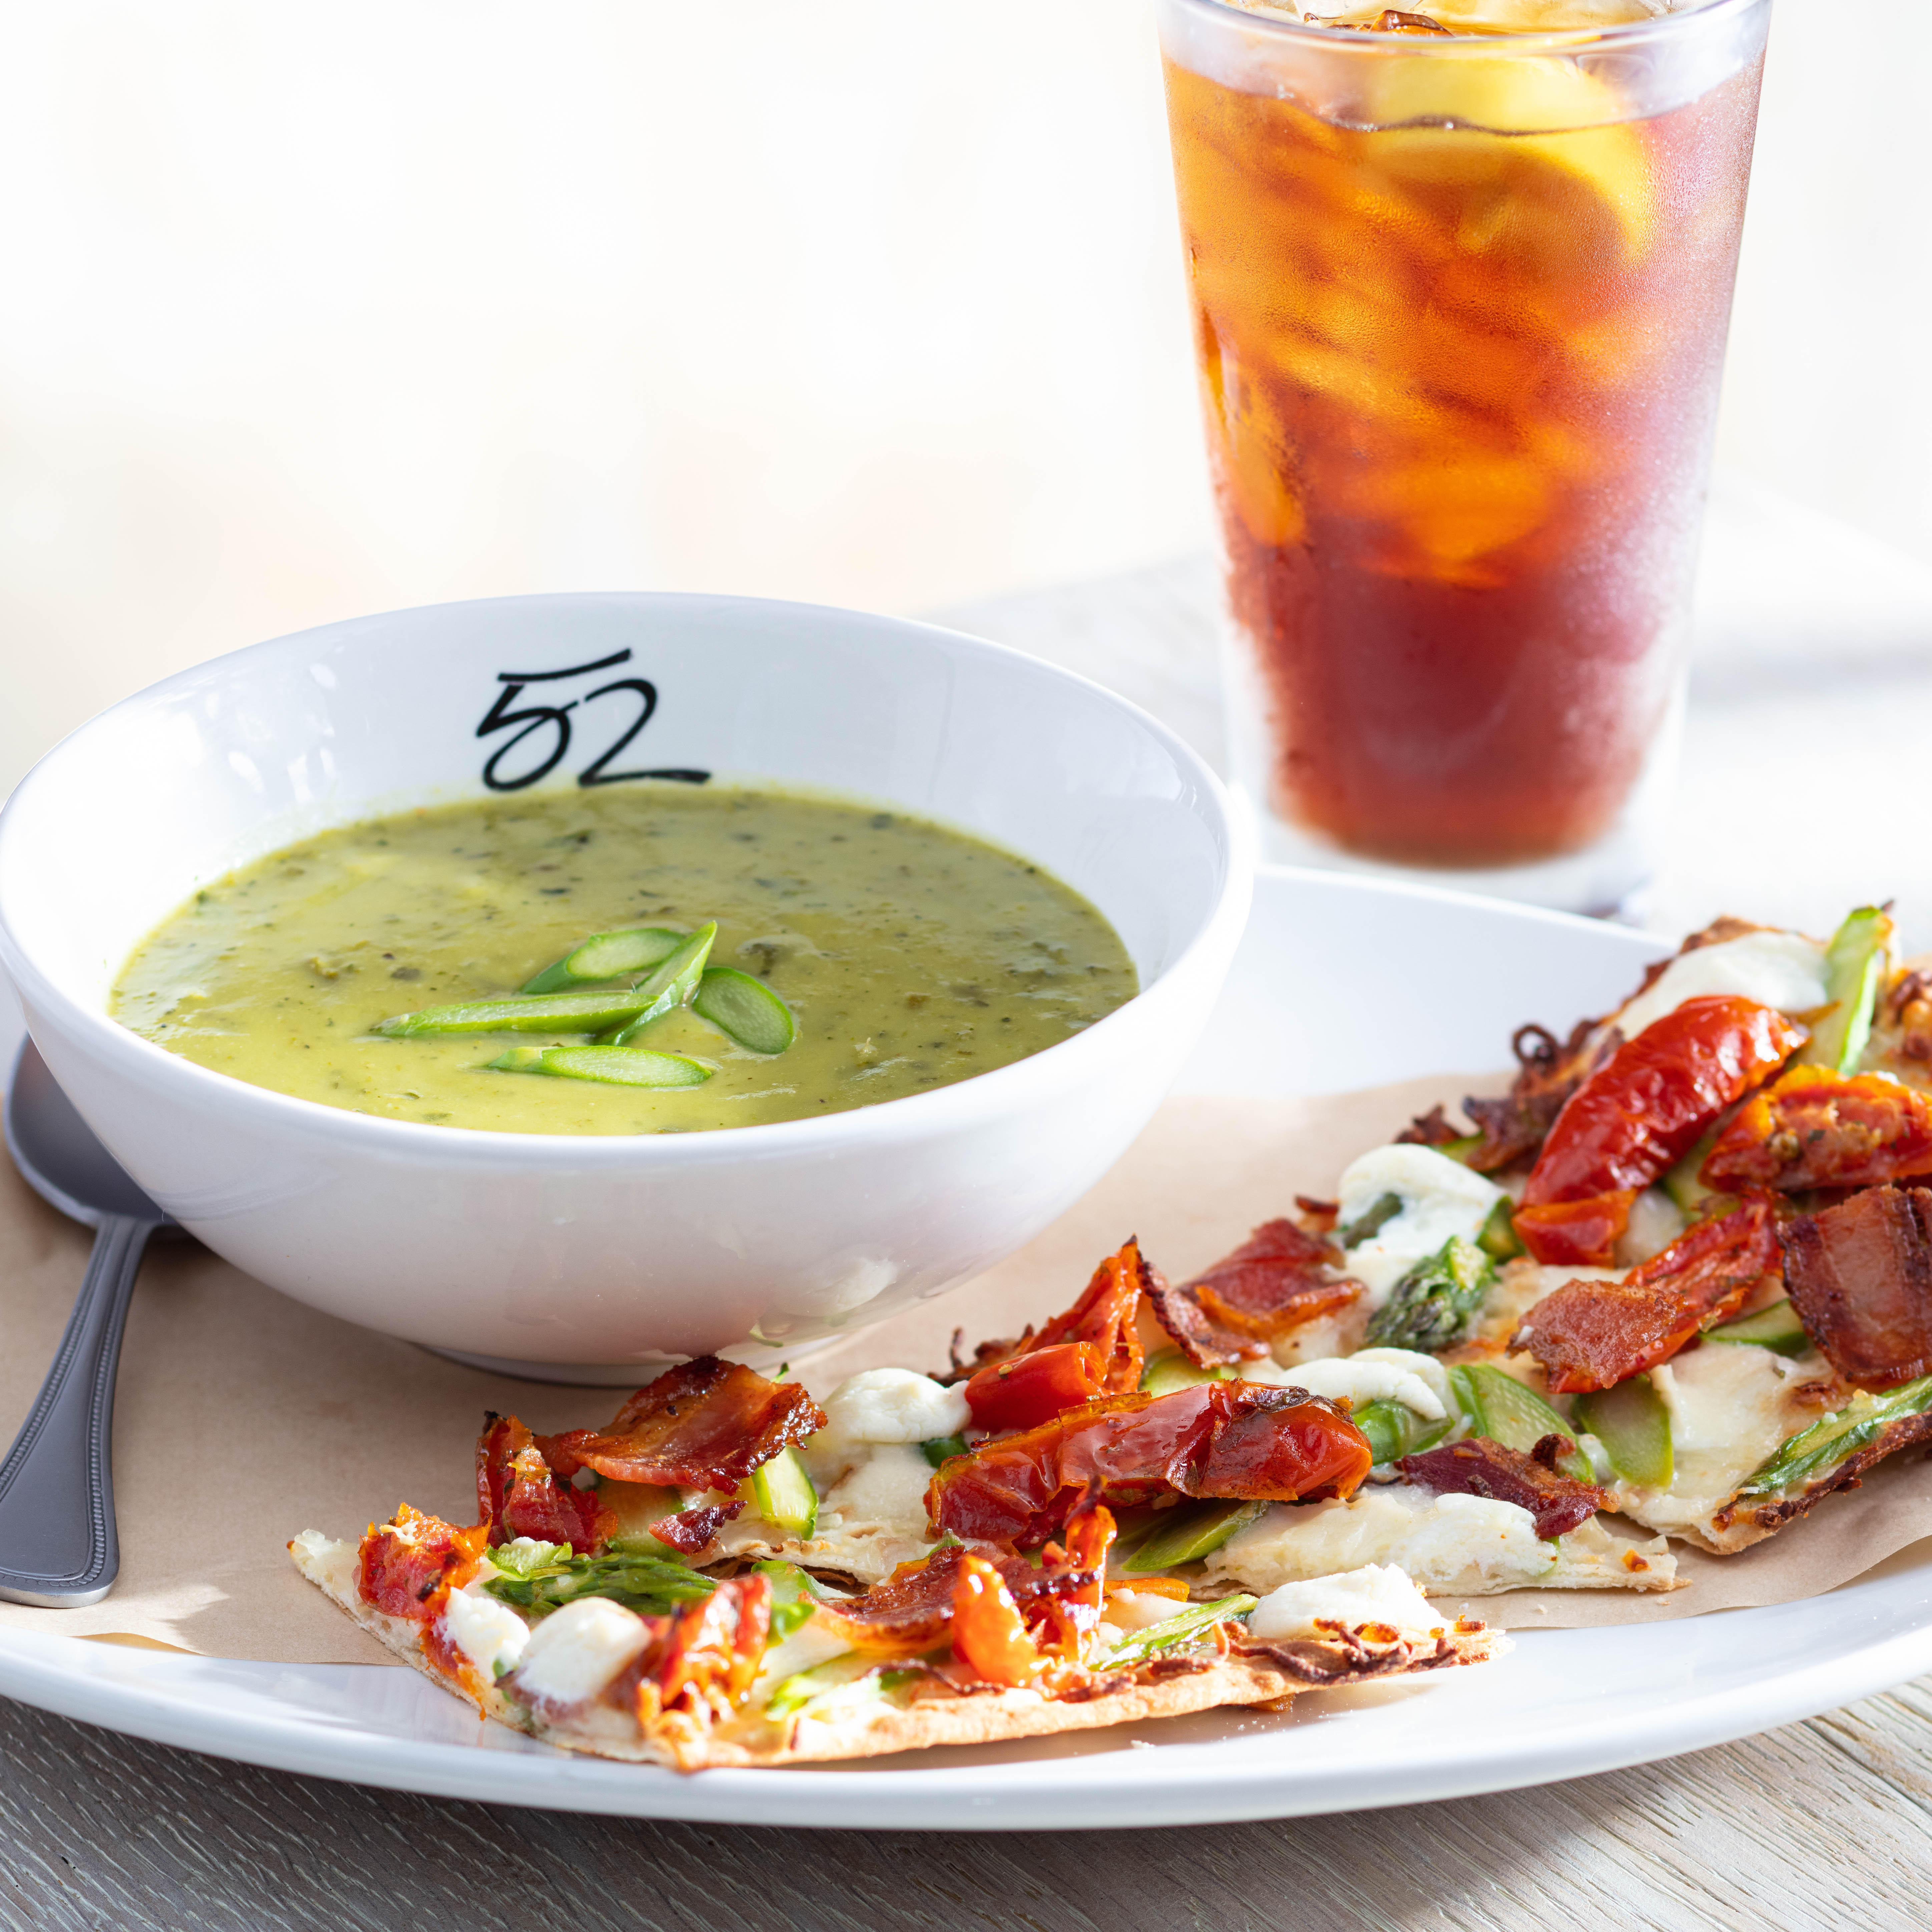 Our seasonal menu offers a variety of lunch pairings of a half flatbread with a soup or salad, as well as entreÌes and handhelds